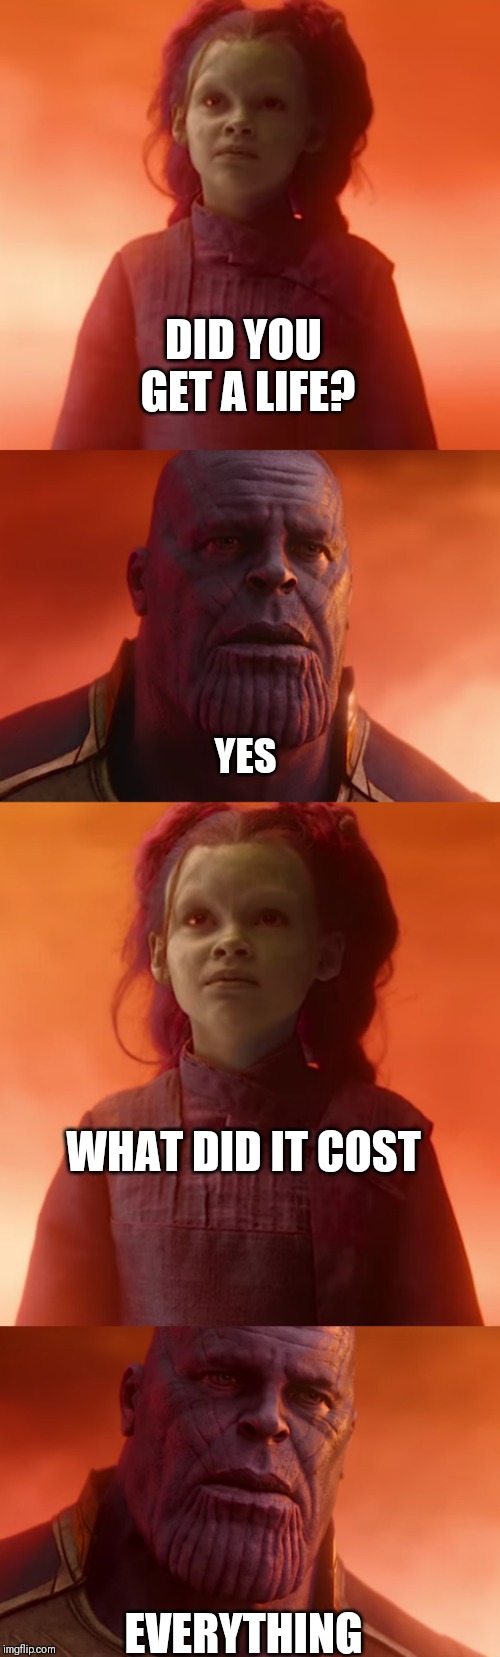 DID YOU GET A LIFE? YES; WHAT DID IT COST; EVERYTHING | made w/ Imgflip meme maker